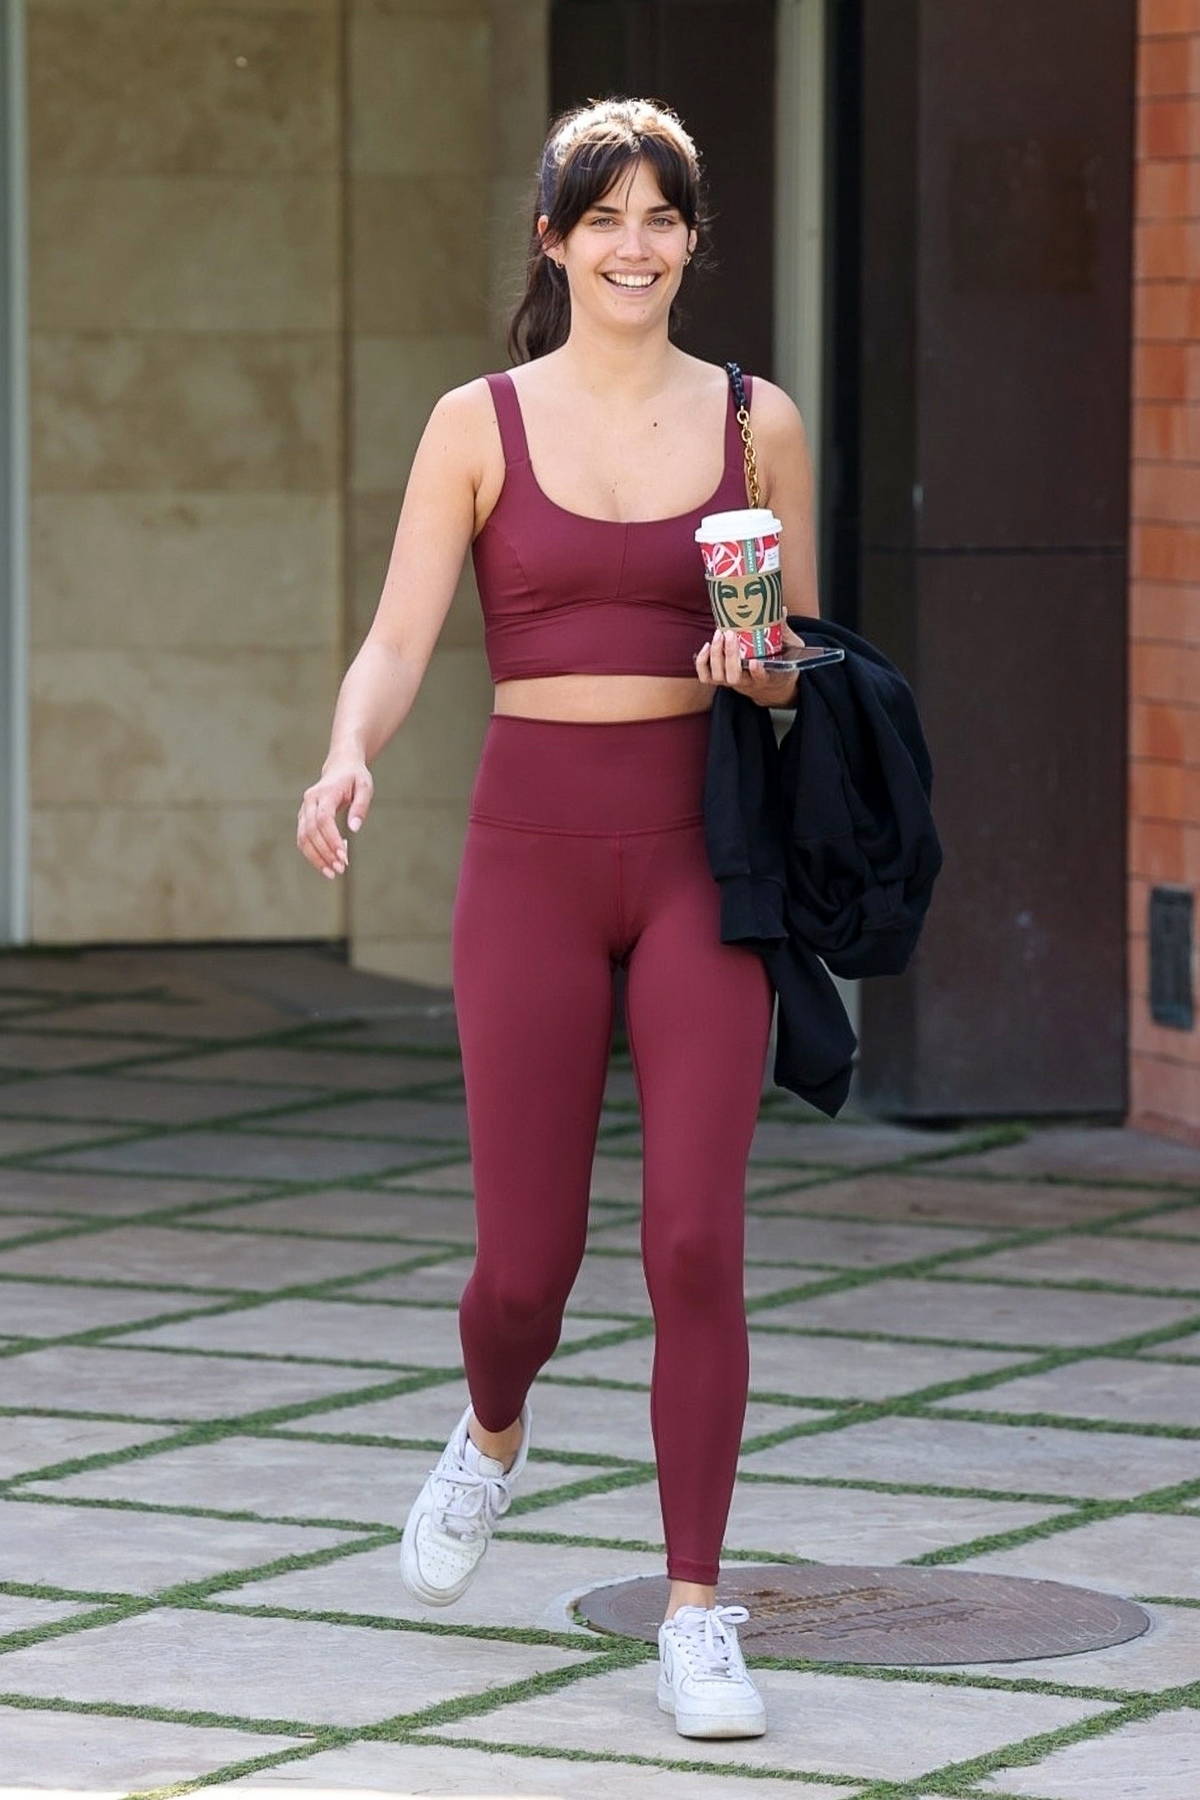 https://www.celebsfirst.com/wp-content/uploads/2022/02/sara-sampaio-displays-her-svelte-figure-in-maroon-sports-bra-and-leggings-as-she-leaves-the-gym-in-west-hollywood-california-010222_9.jpg